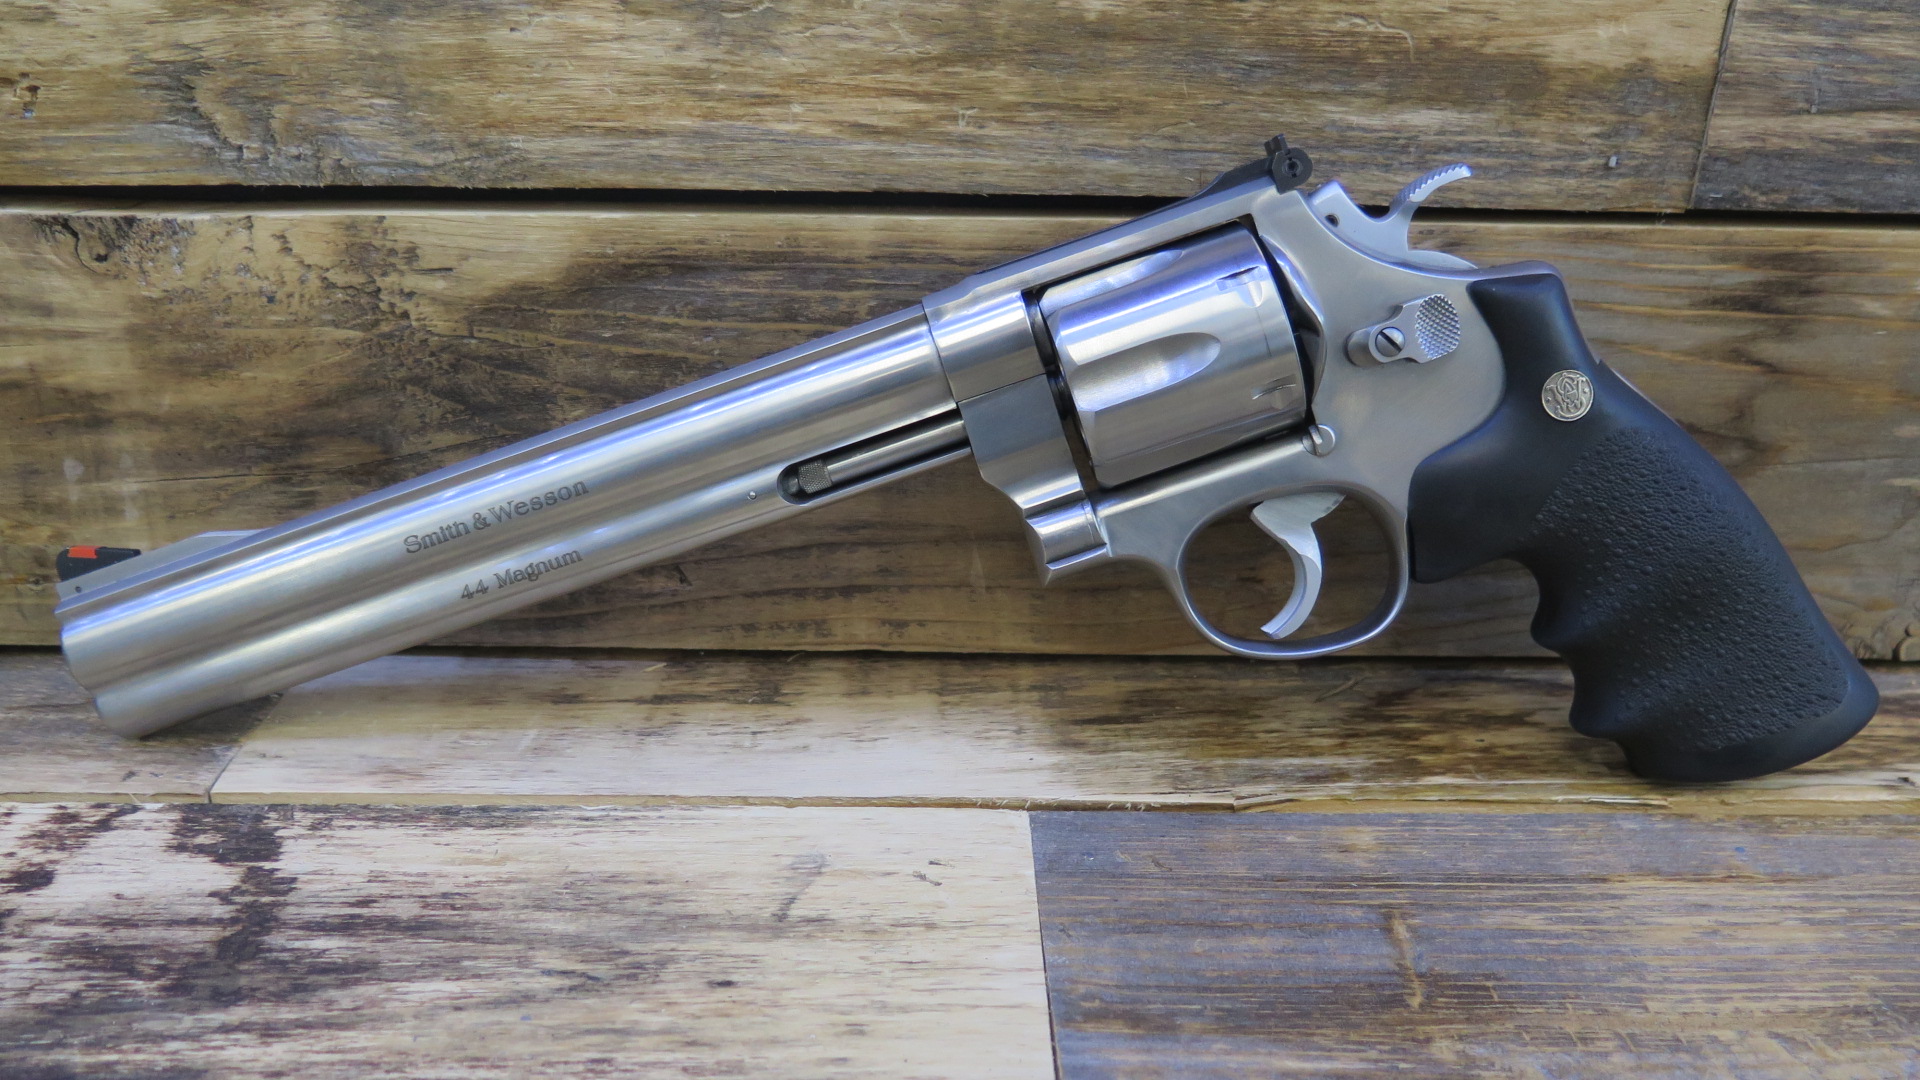 44 magnum revolver smith and wesson